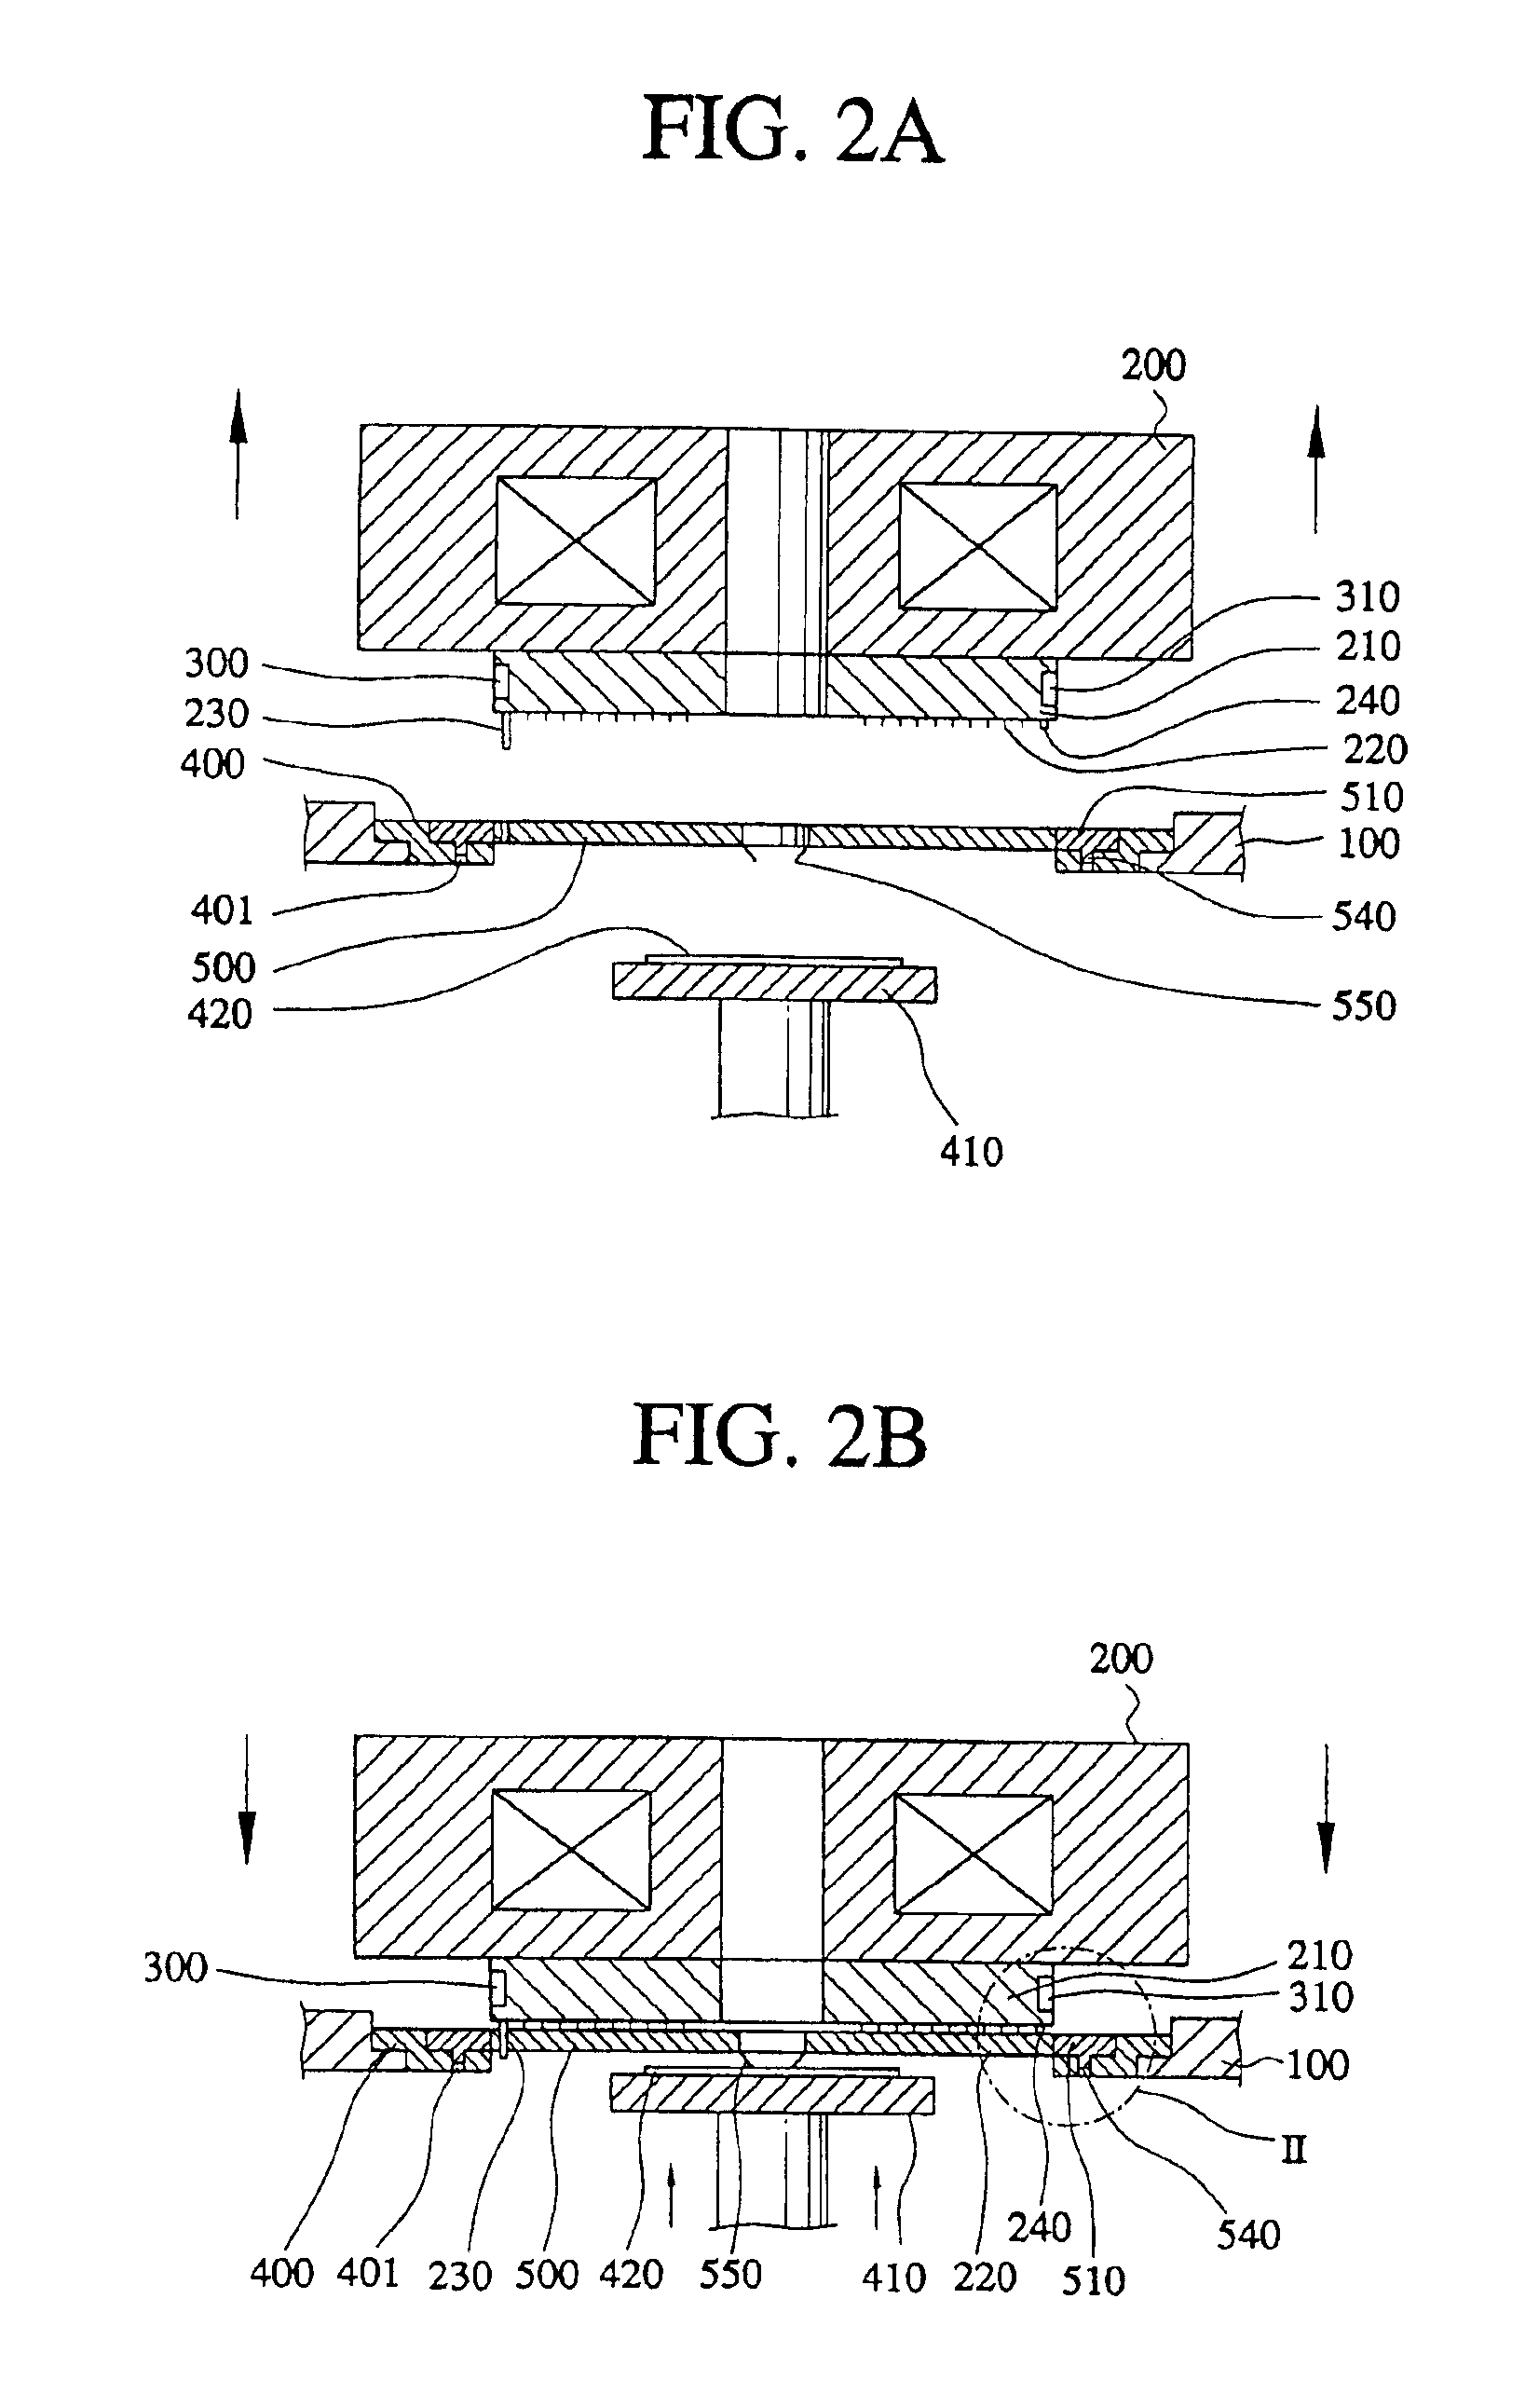 Wafer probing test apparatus and method of docking the test head and probe card thereof